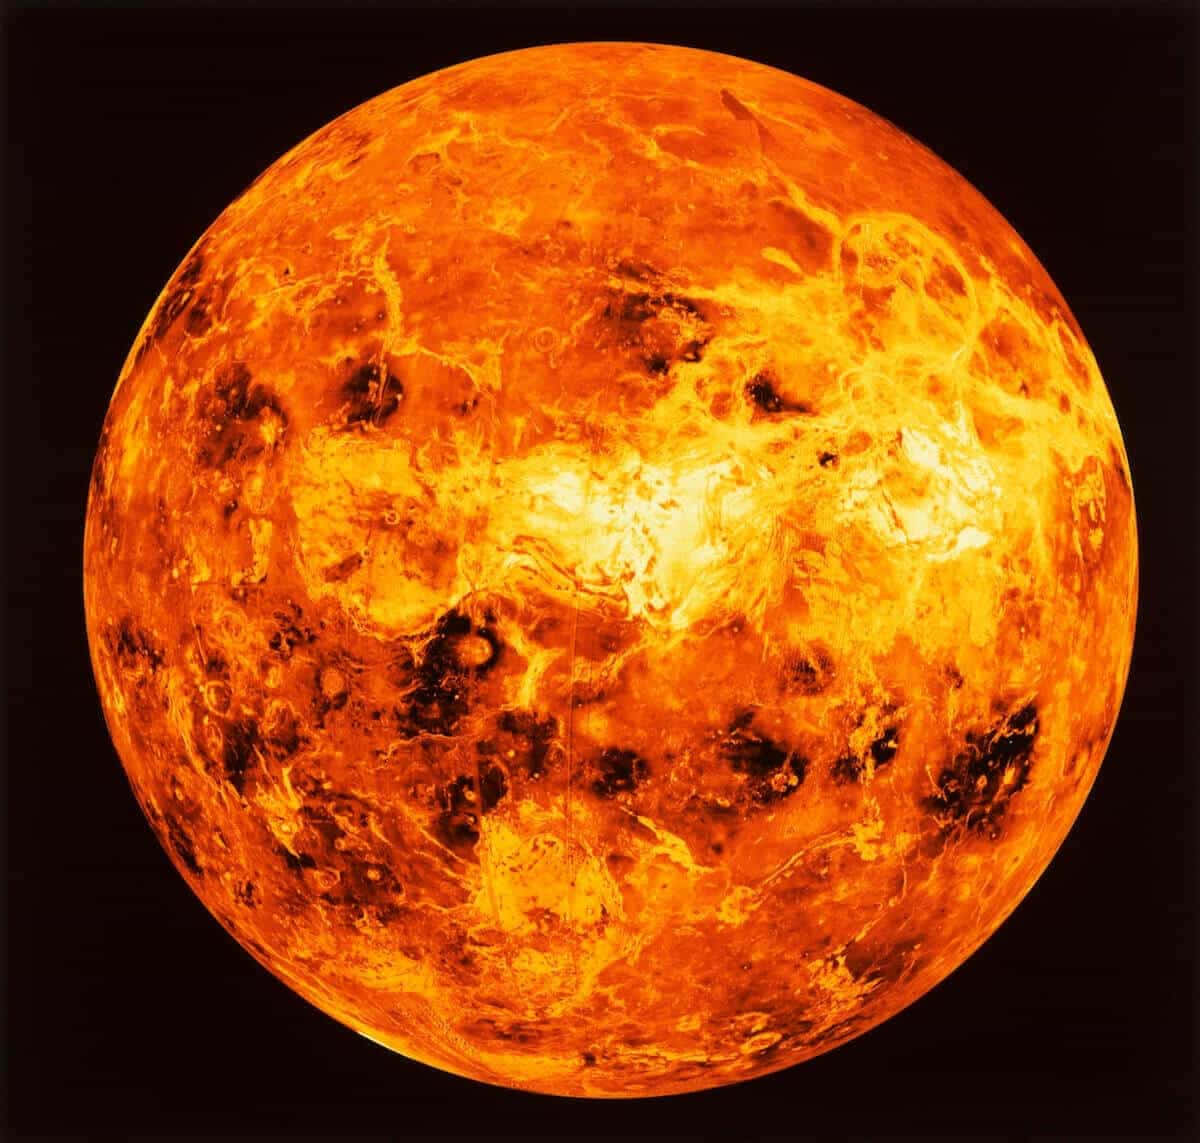 The mesmerizing sight of Venus, the second brightest planet from the Sun